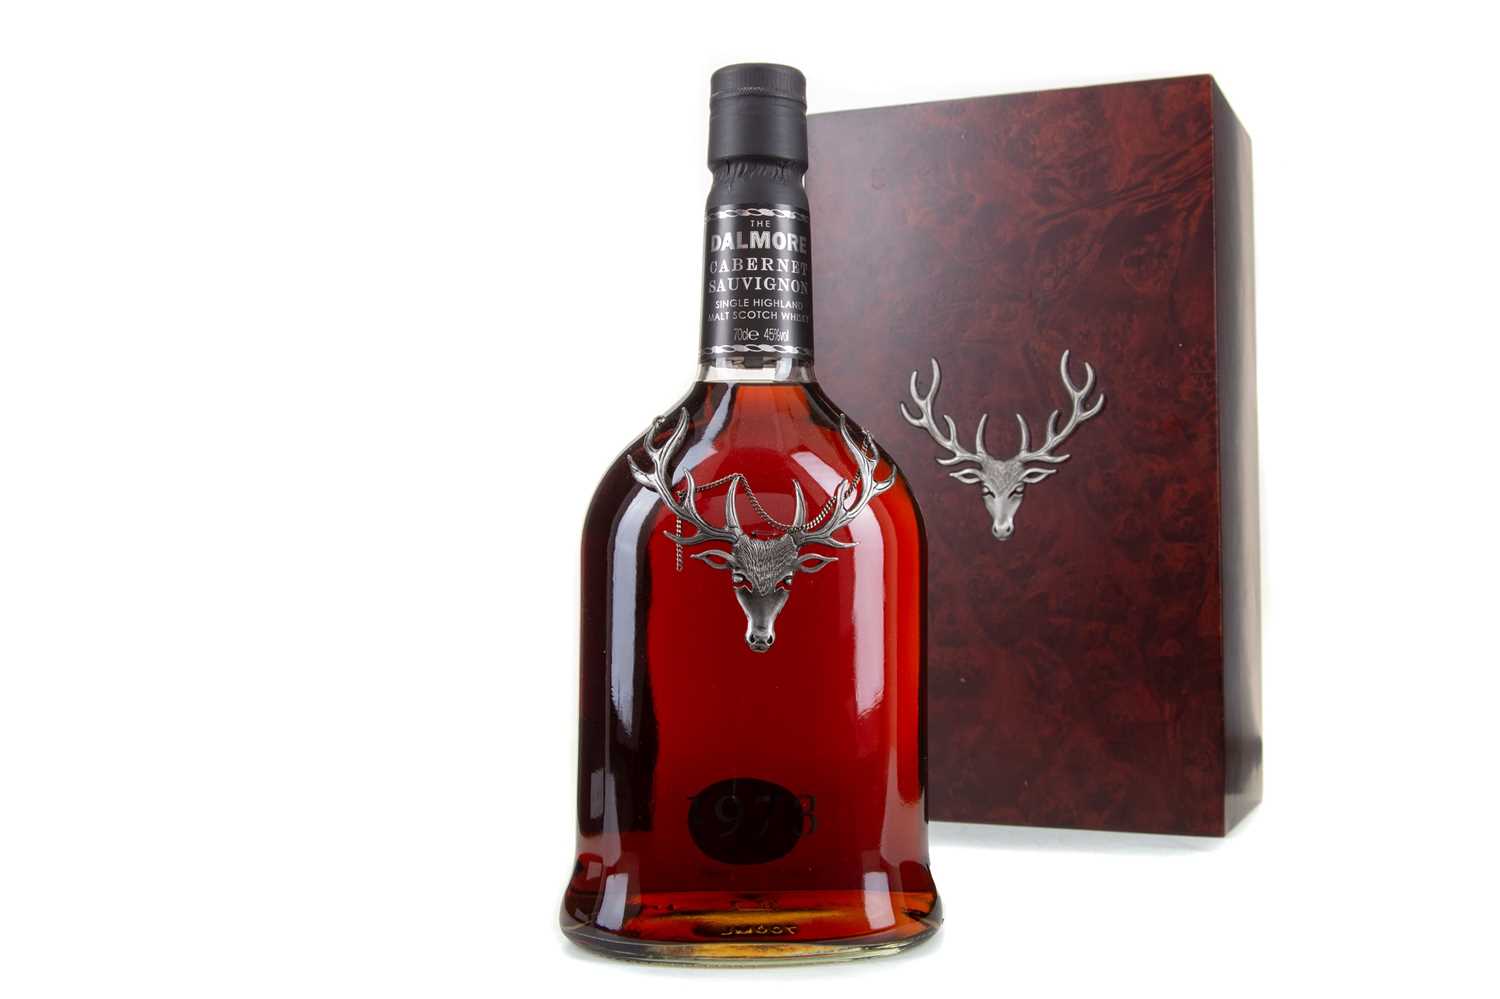 Lot 237 - DALMORE 1973 33 YEAR OLD